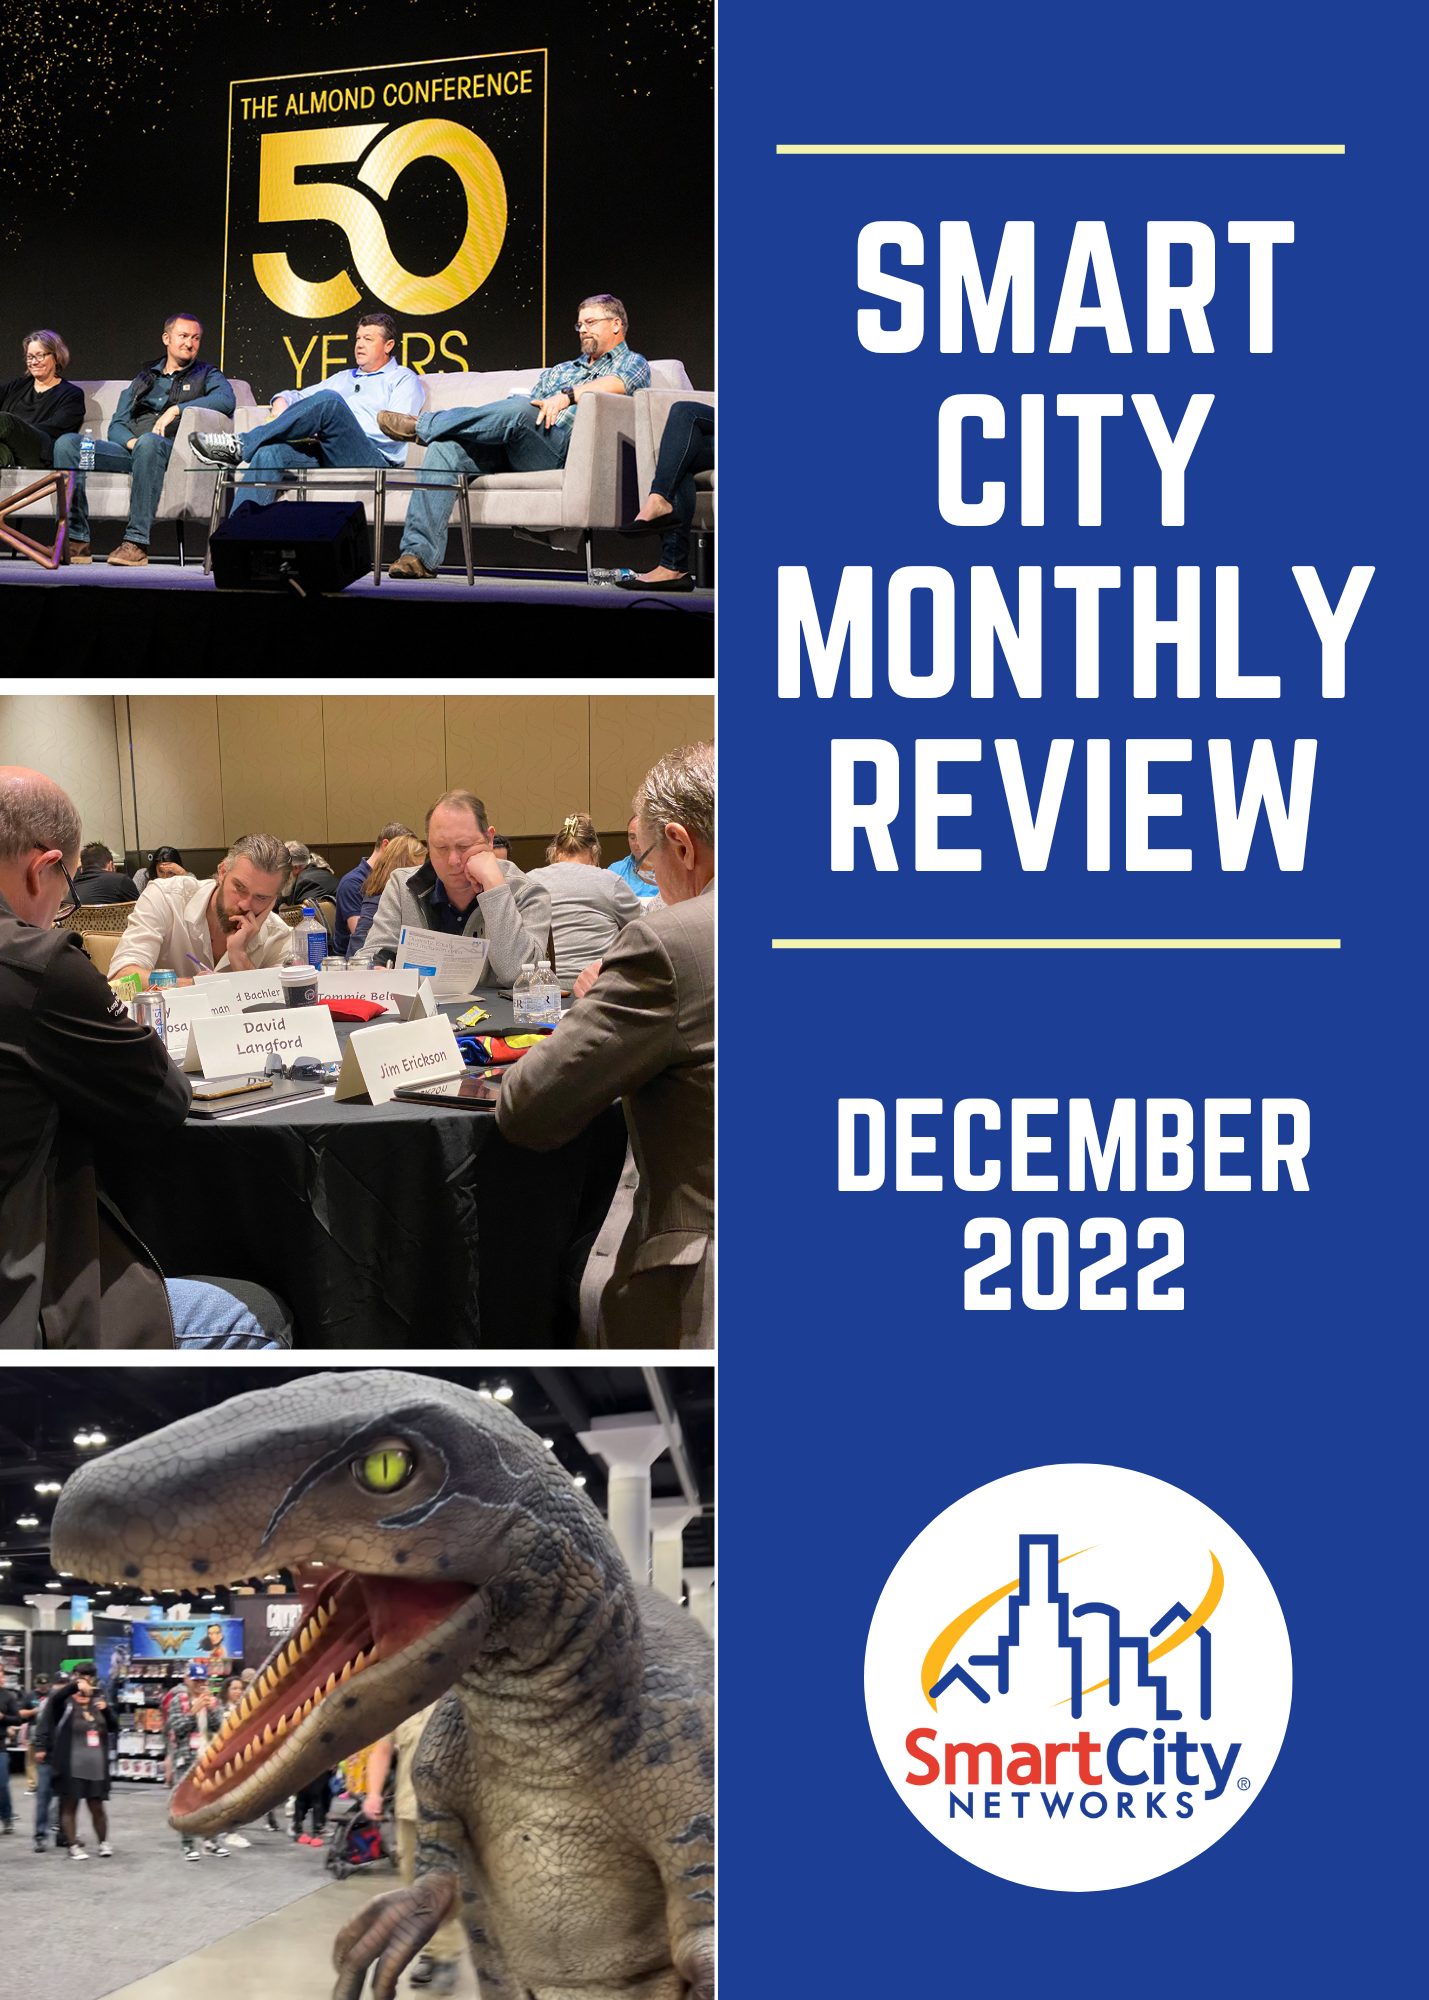 Smart City Networks Month in Review: December 2022